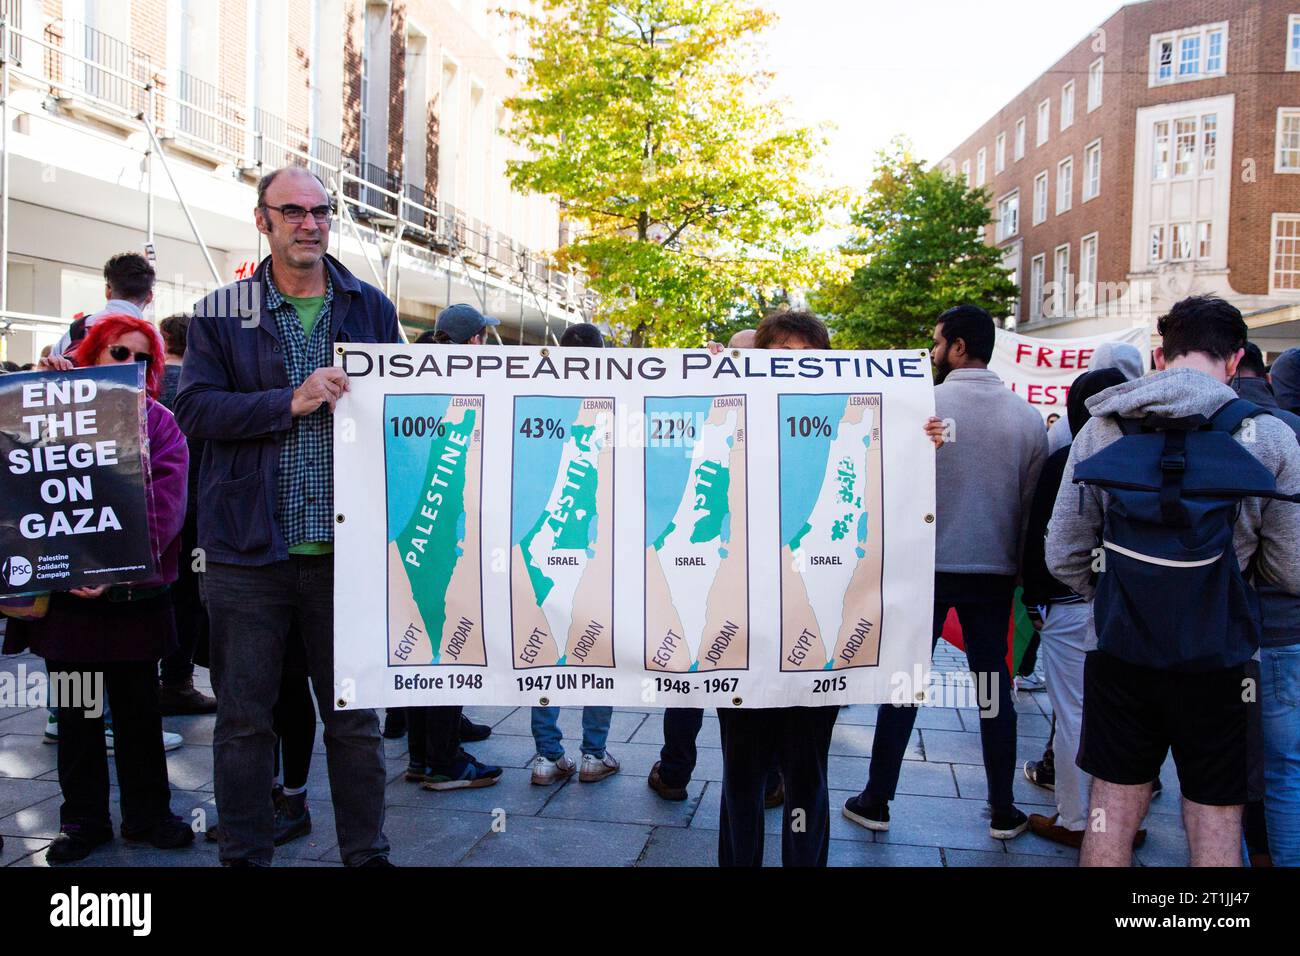 Free Palestine protest Exeter city centre - gentleman and hidden lady holding large 'disappearing Palestine' banner with map graphics and percentages Stock Photo